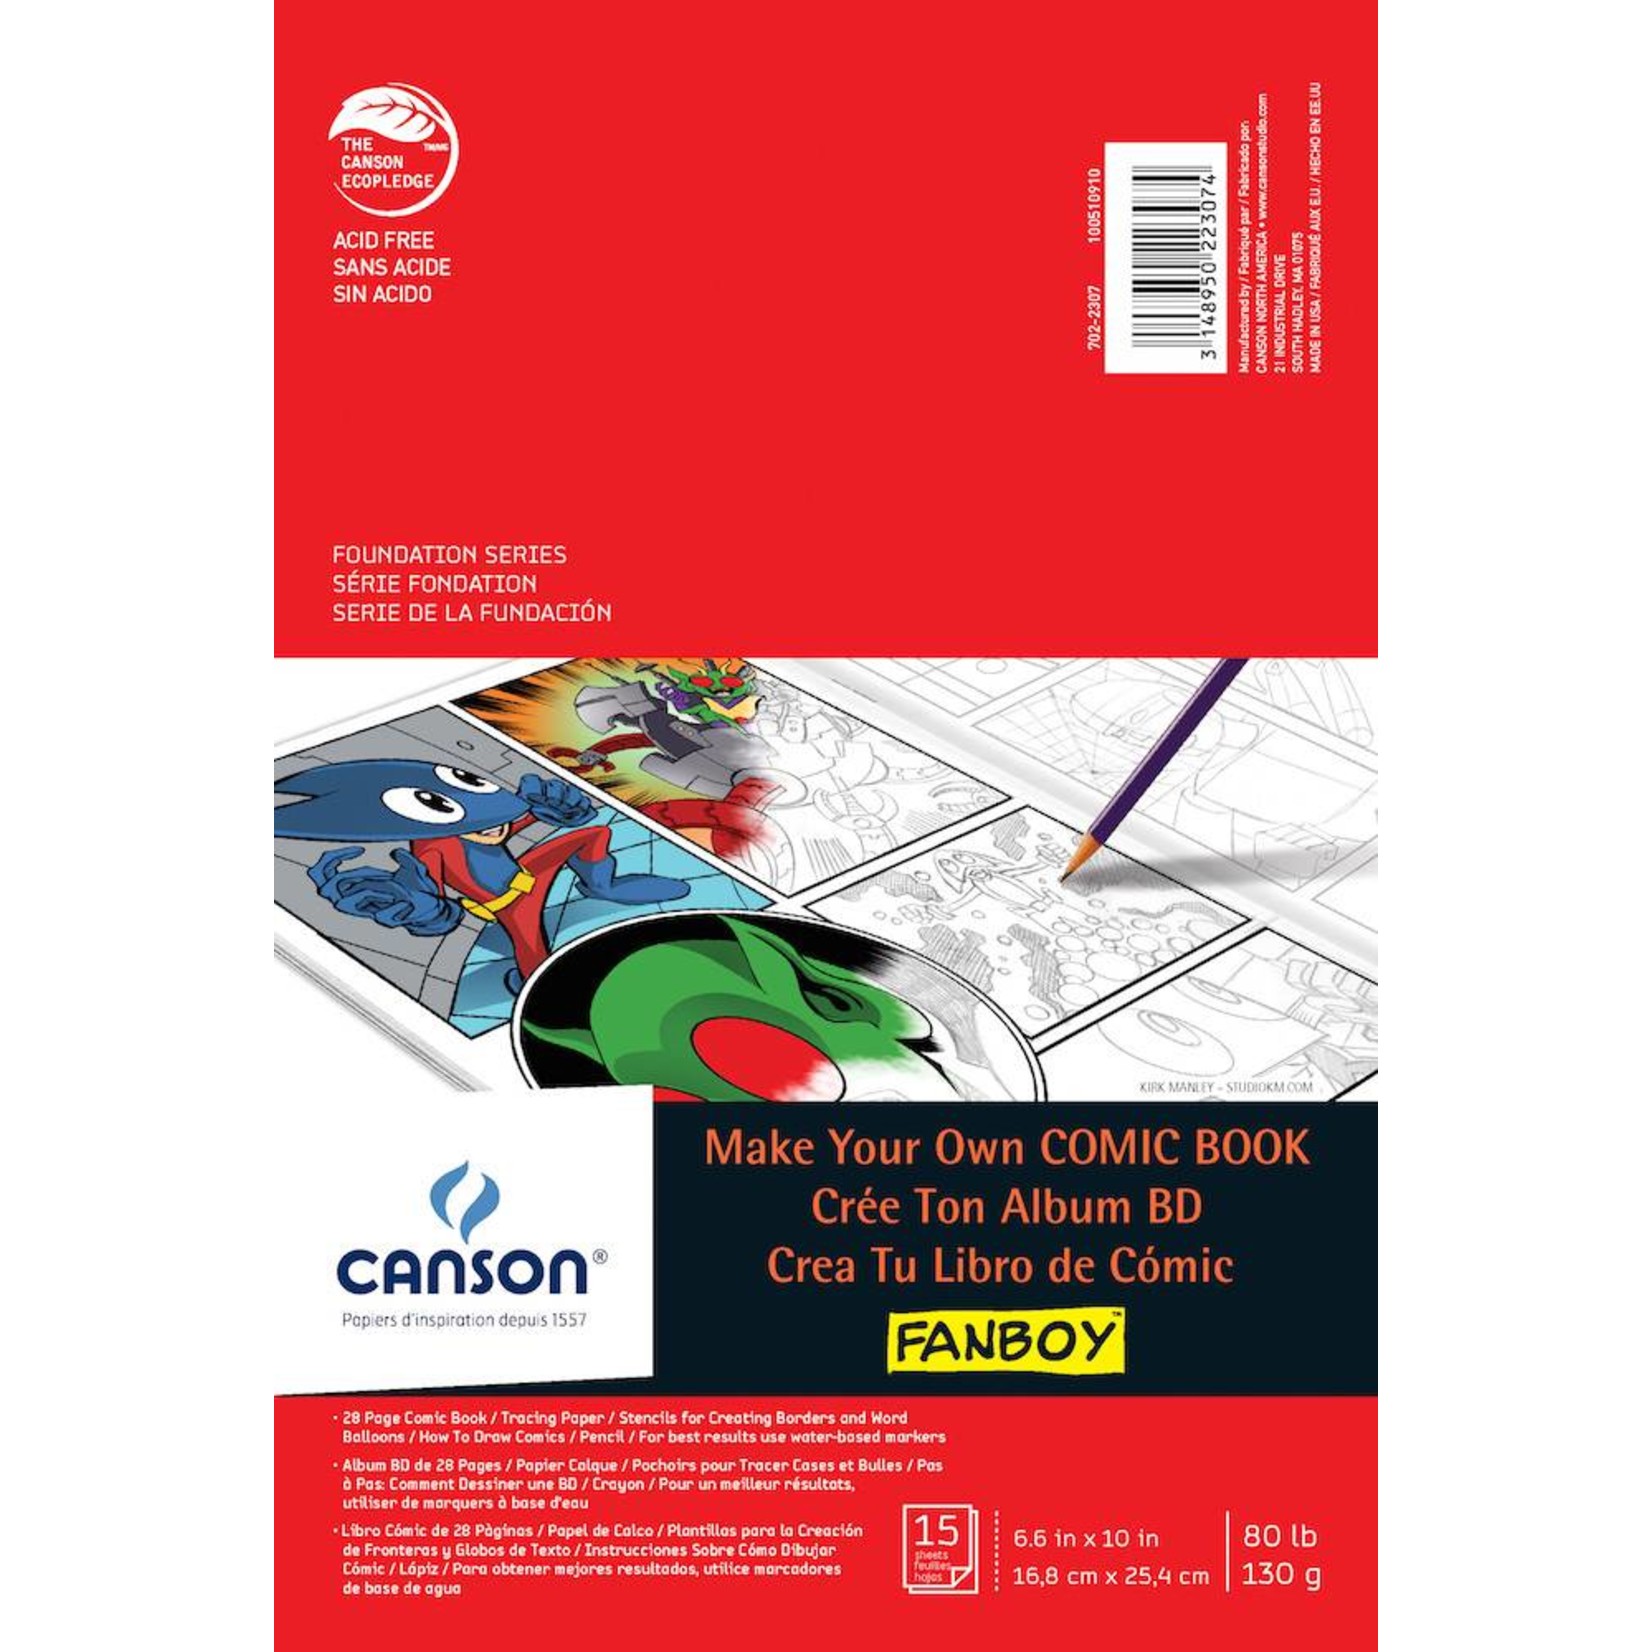 CANSON CANSON MAKE YOUR OWN COMIC BOOK KIT    CAN-100510910